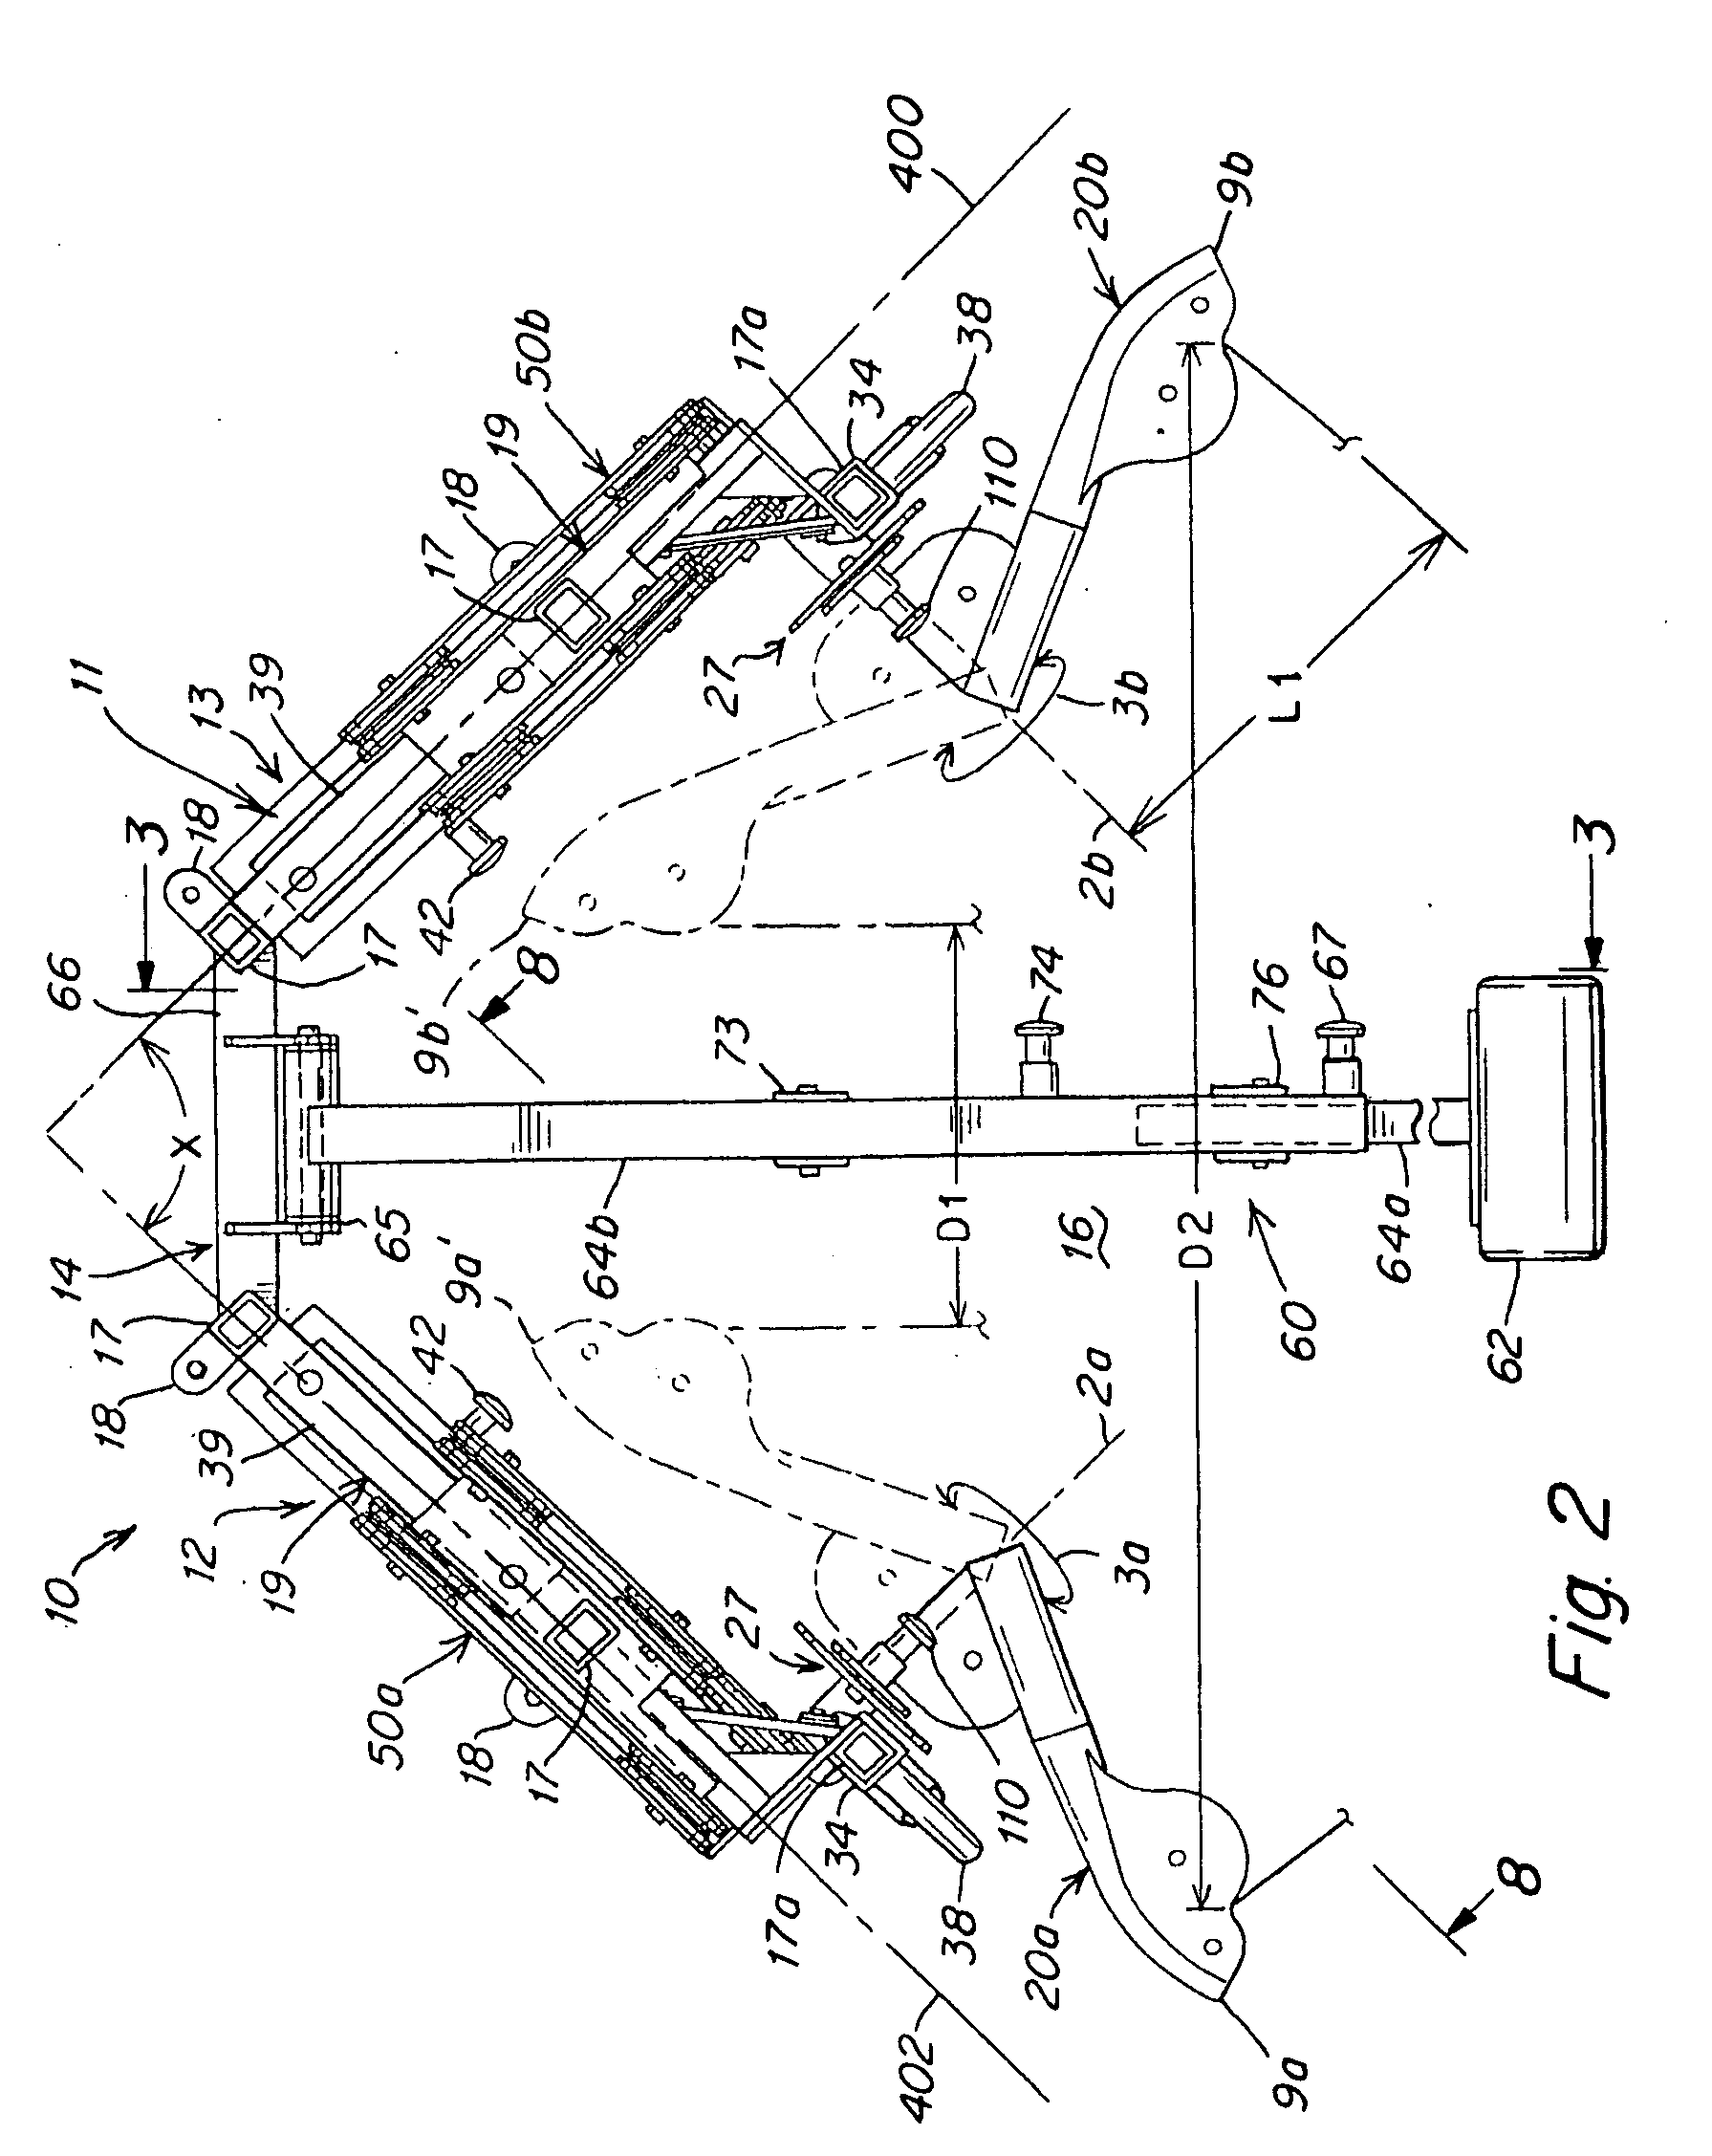 Adjustable assembly for exercise apparatus